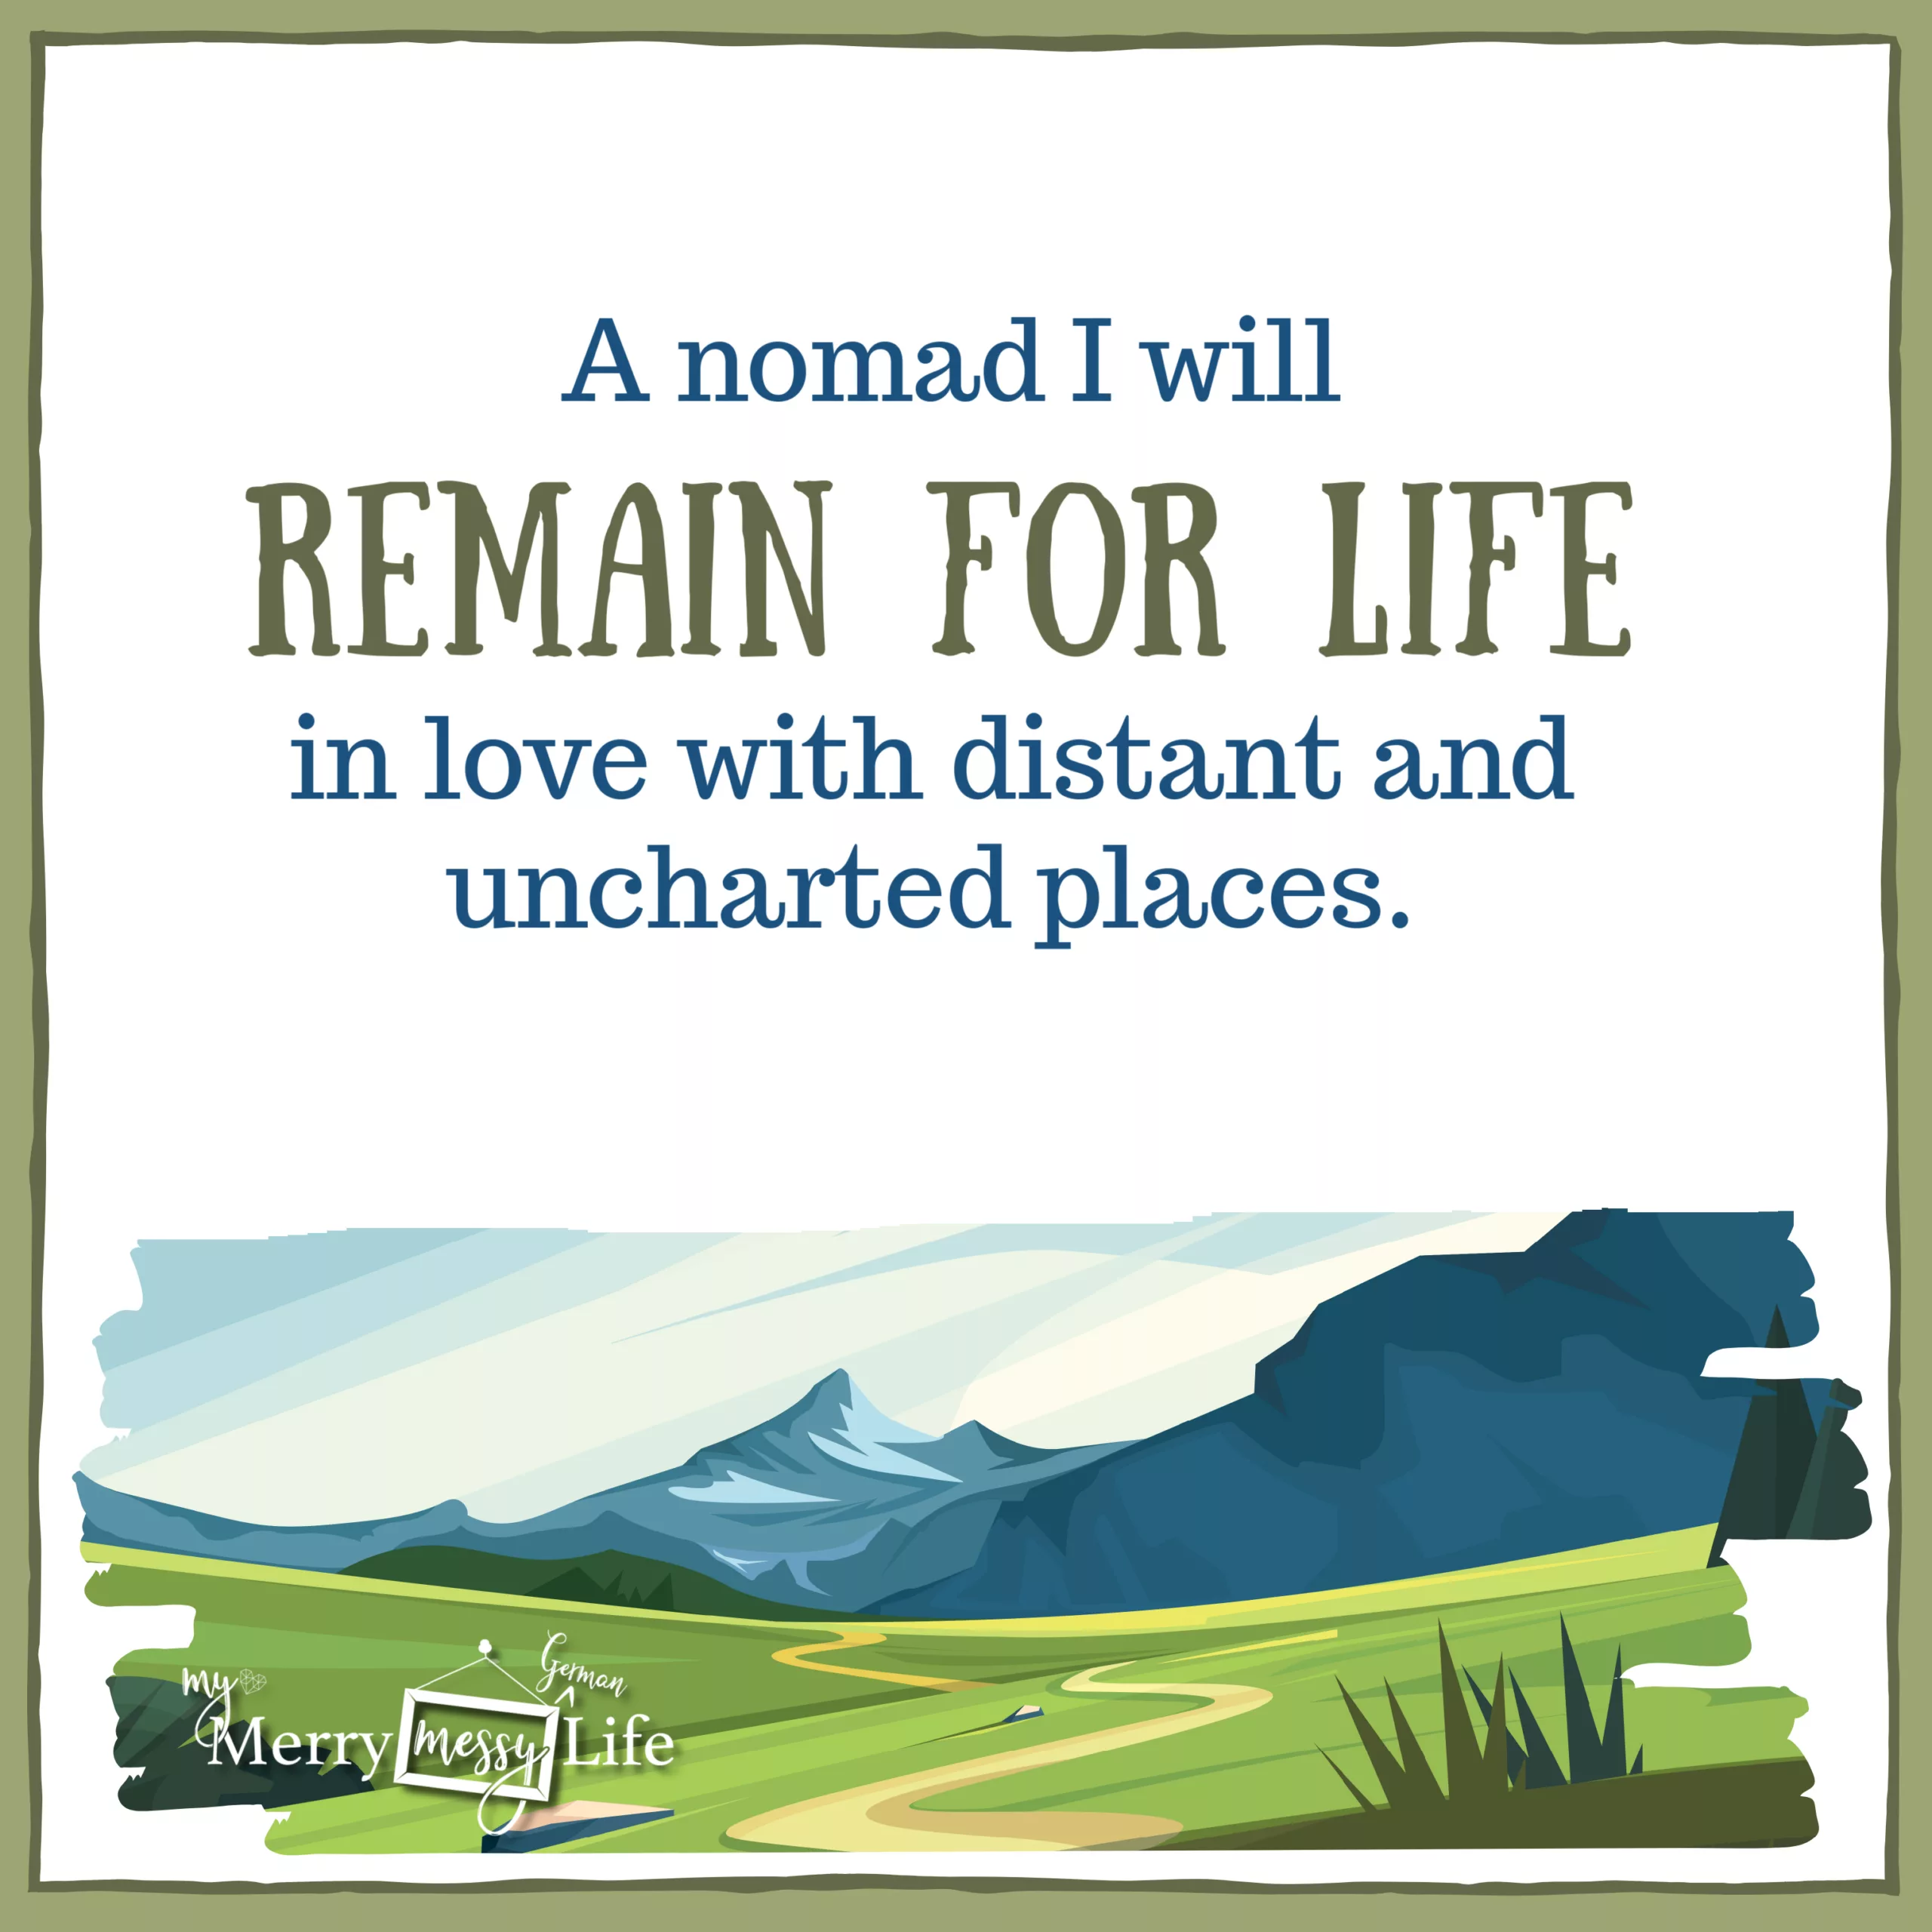 Quotes About Living Abroad - A nomad I will remain for life, in love with distant and uncharted places.